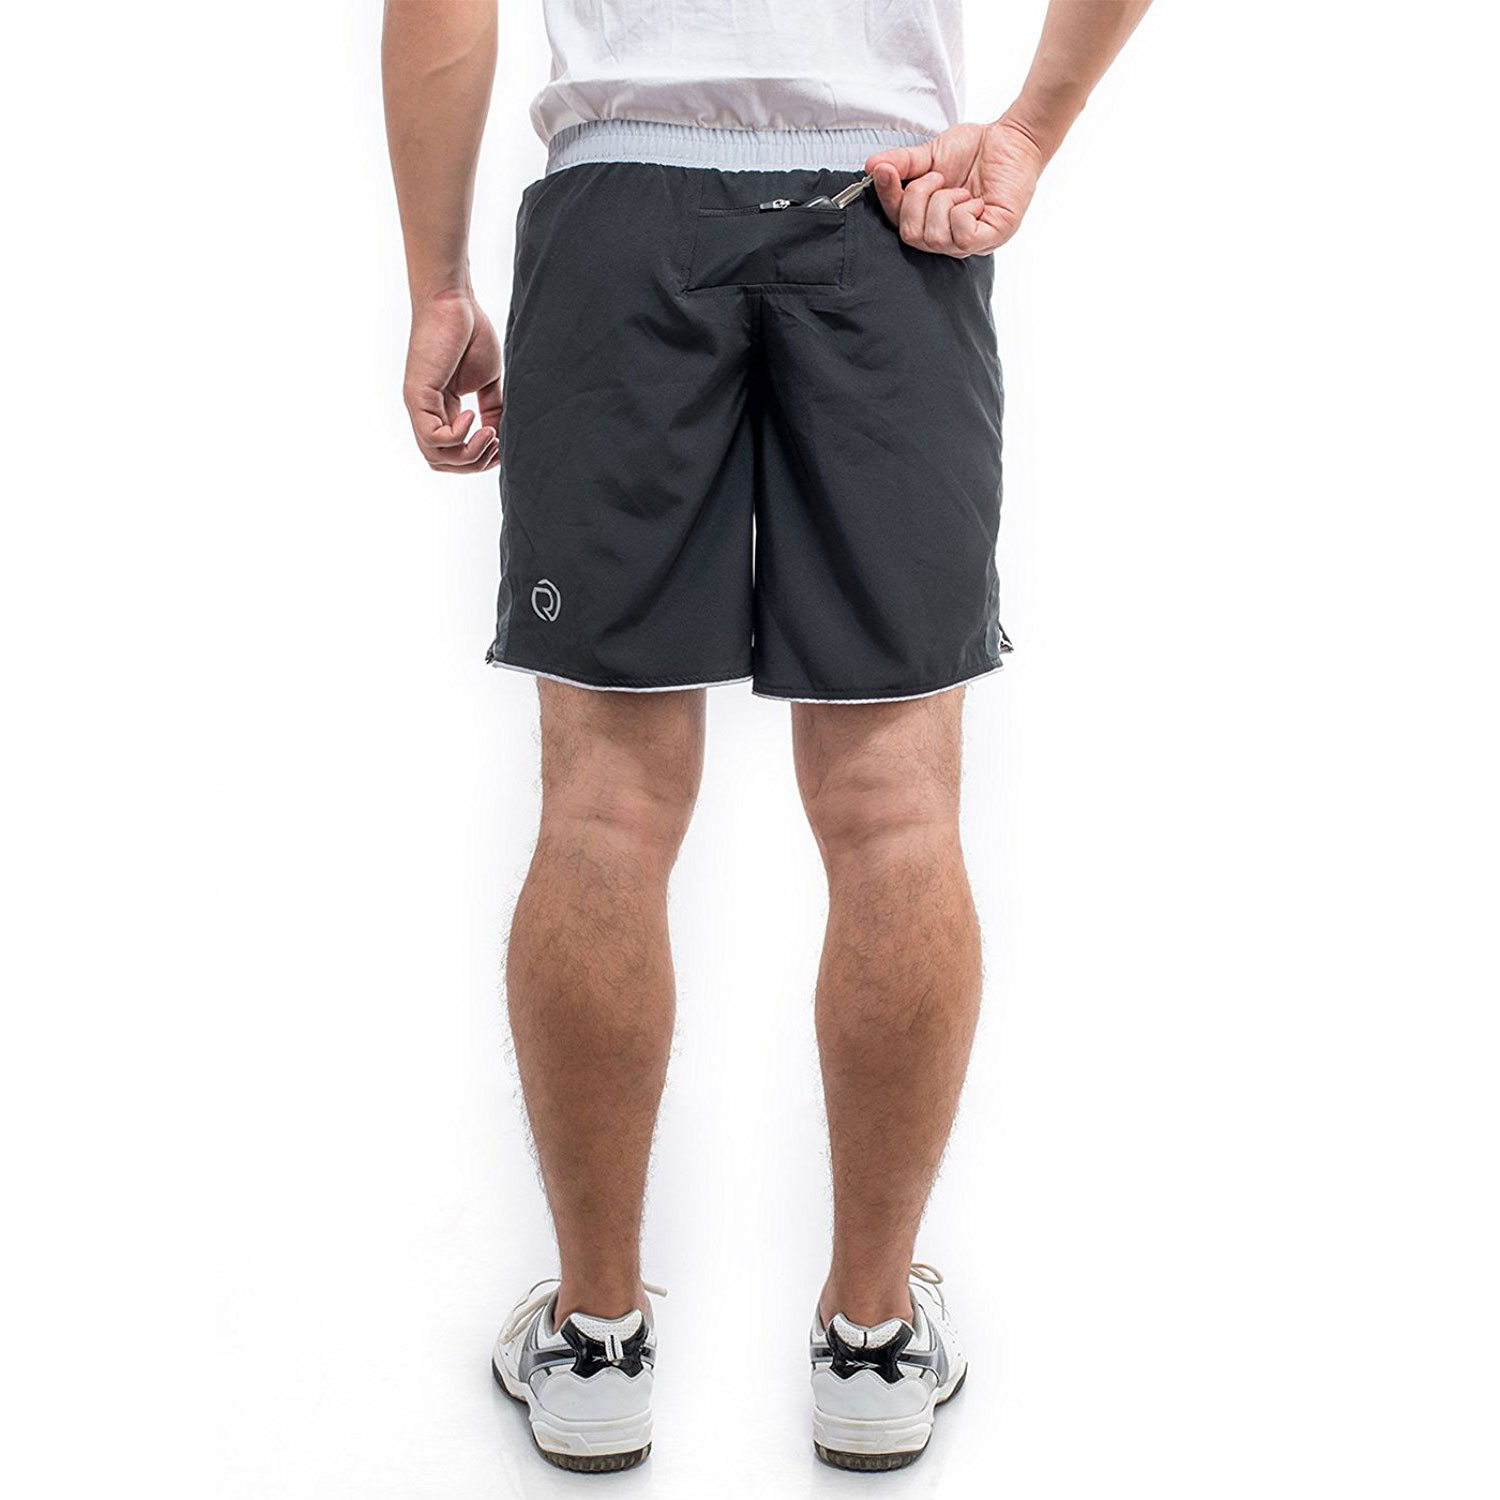  Mens Dry Fit Sports Shorts with Zipper Back pocket by TRUEREVO- 7